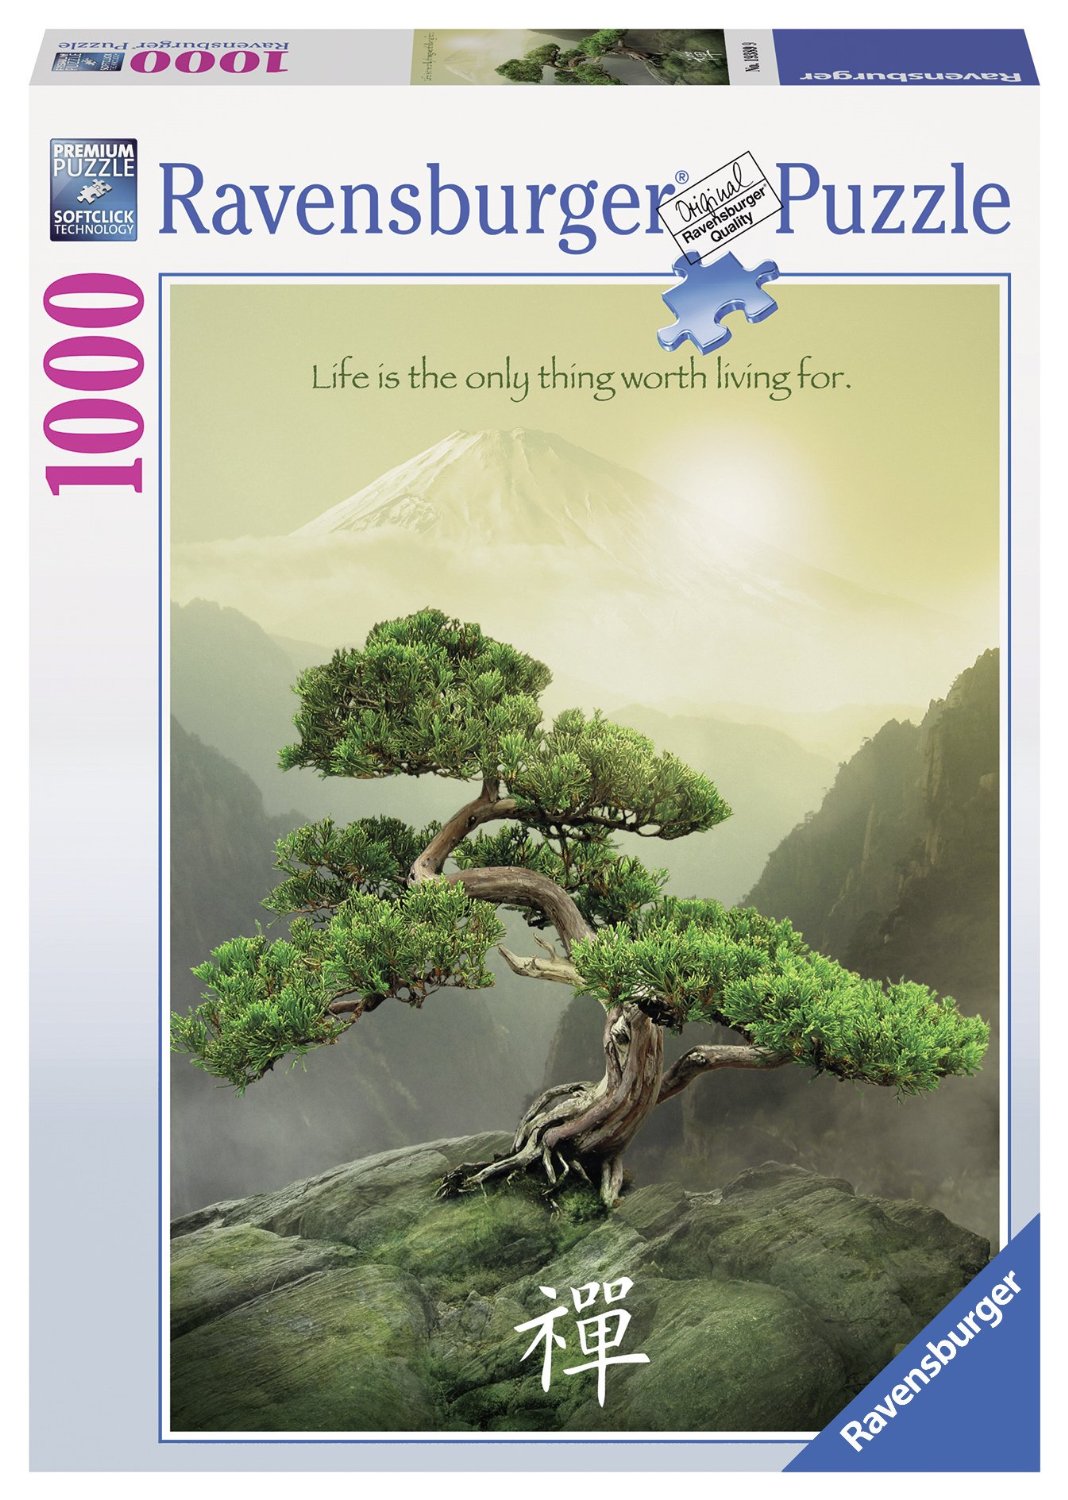 ravensburger puzzle Zen Tree 1000 Piece Life Is The Only Thing Worth To Live For 